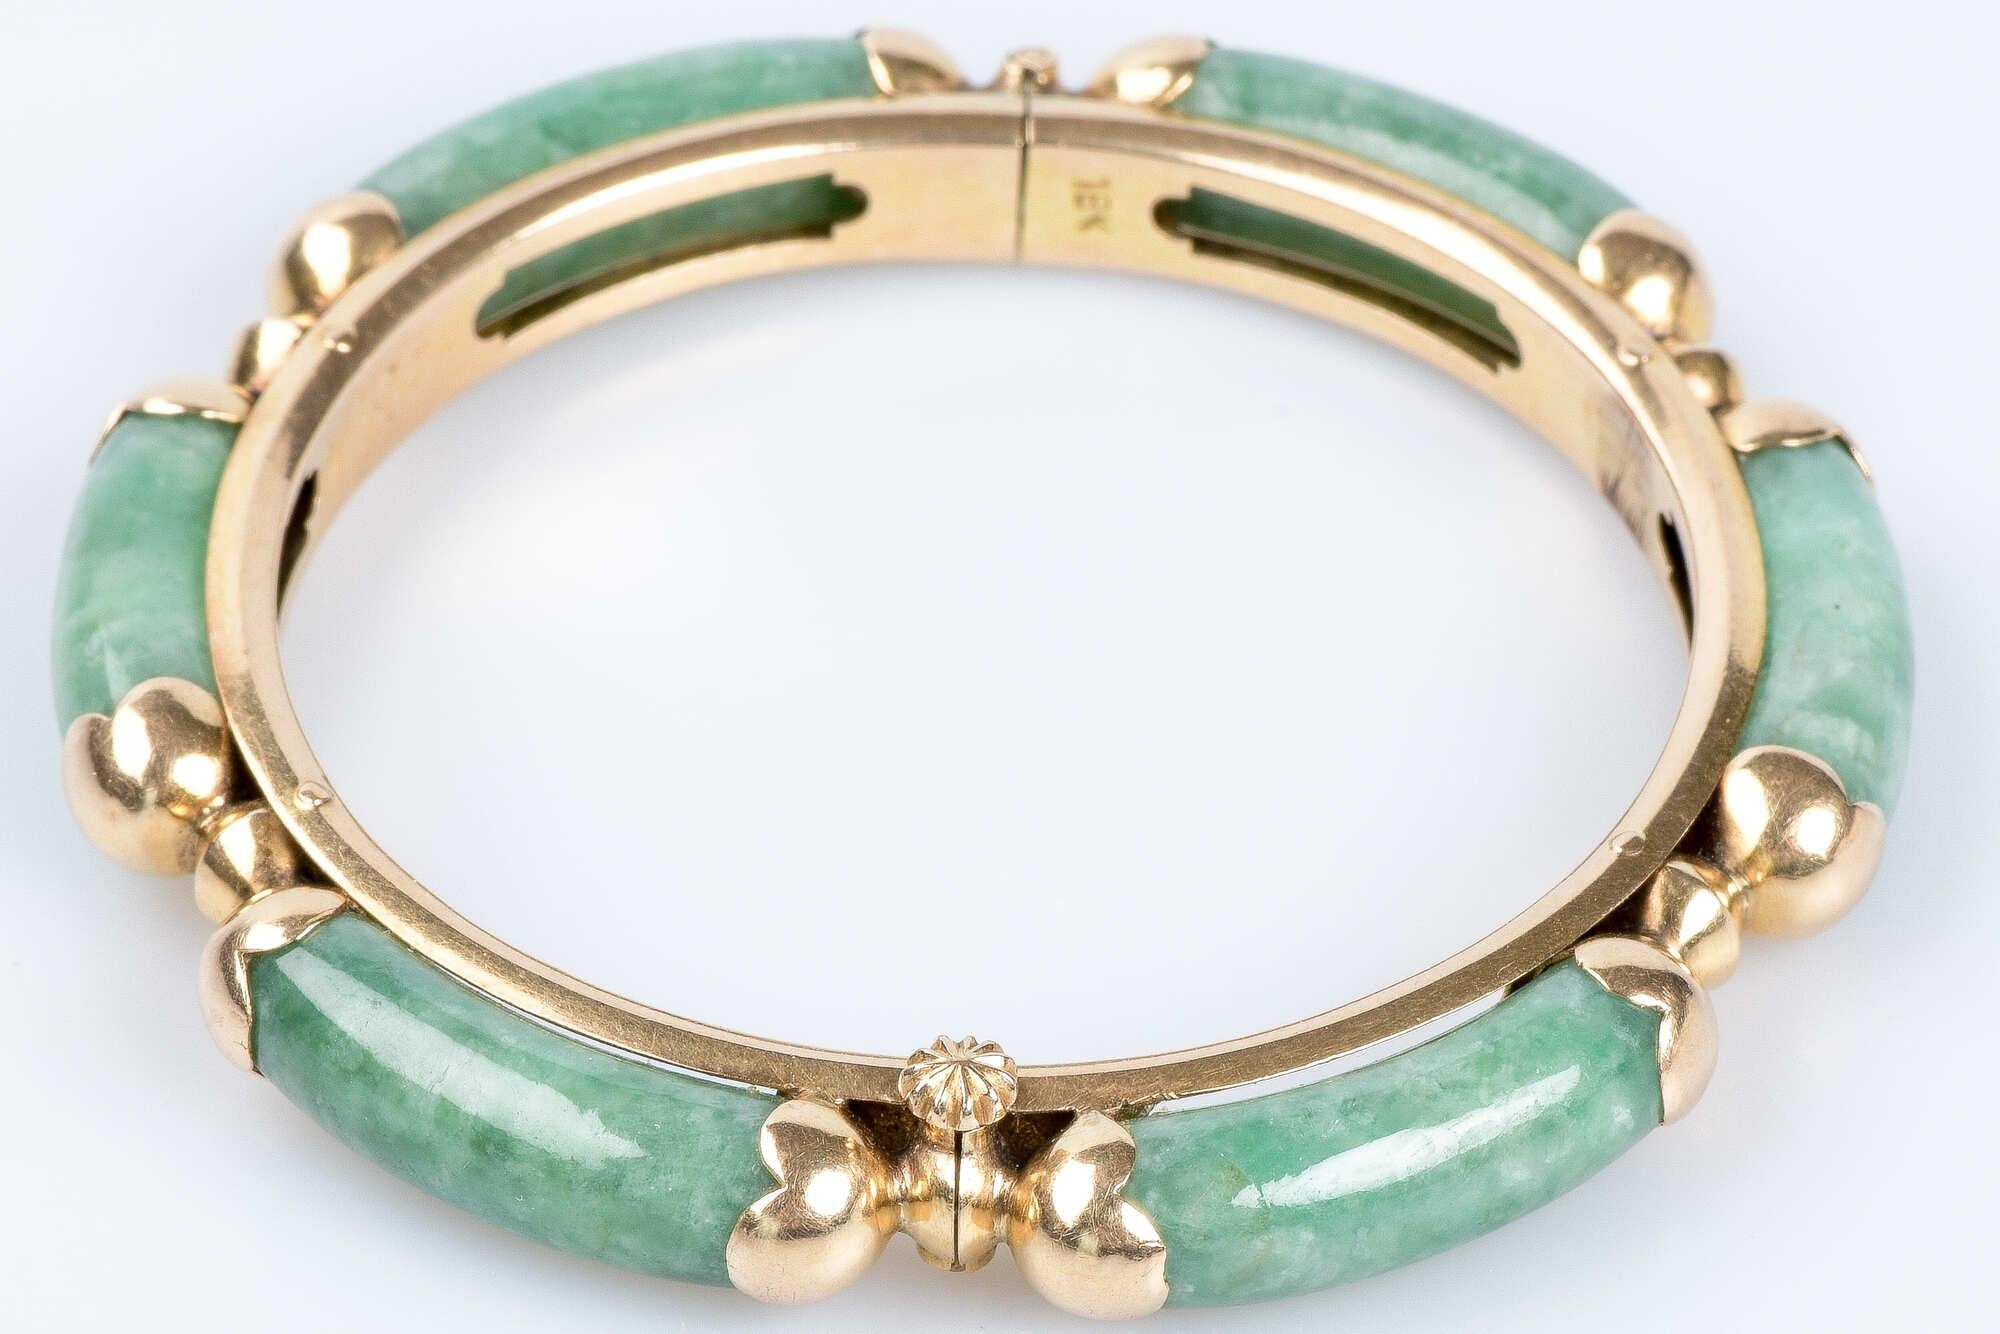 18K yellow gold bracelet with 6 jades. This bracelet has a curved shape that fits the wrist and a clasp that allows you to put it on and remove it very easily while guaranteeing a safe and comfortable fit. The design is elegant and brings a touch of